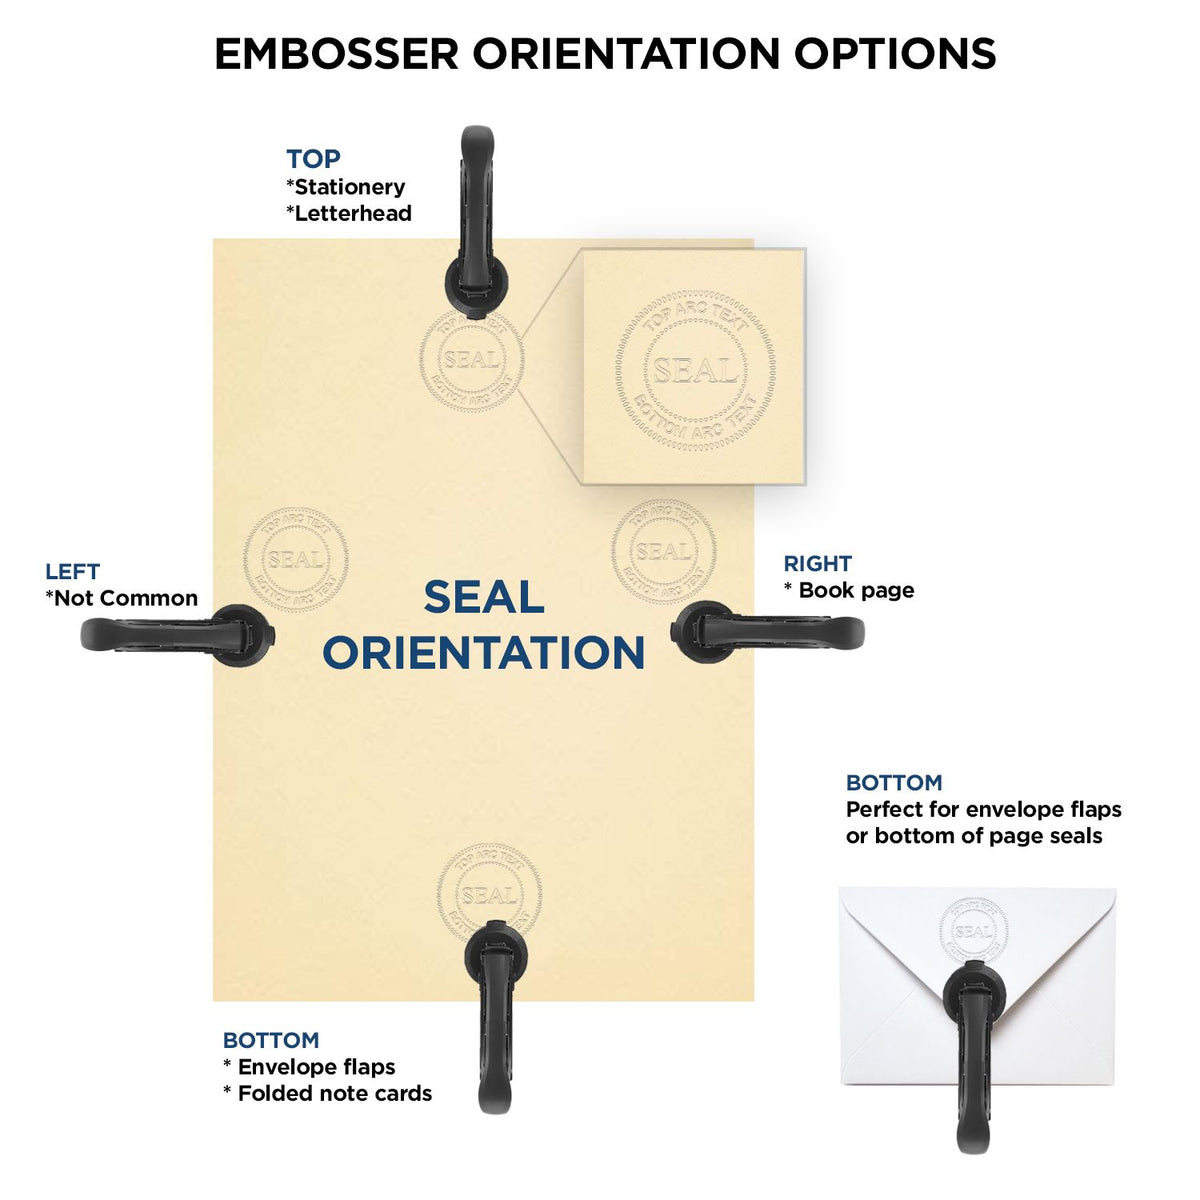 An infographic for the State of Pennsylvania Extended Long Reach Engineer Seal showing embosser orientation, this is showing examples of a top, bottom, right and left insert.